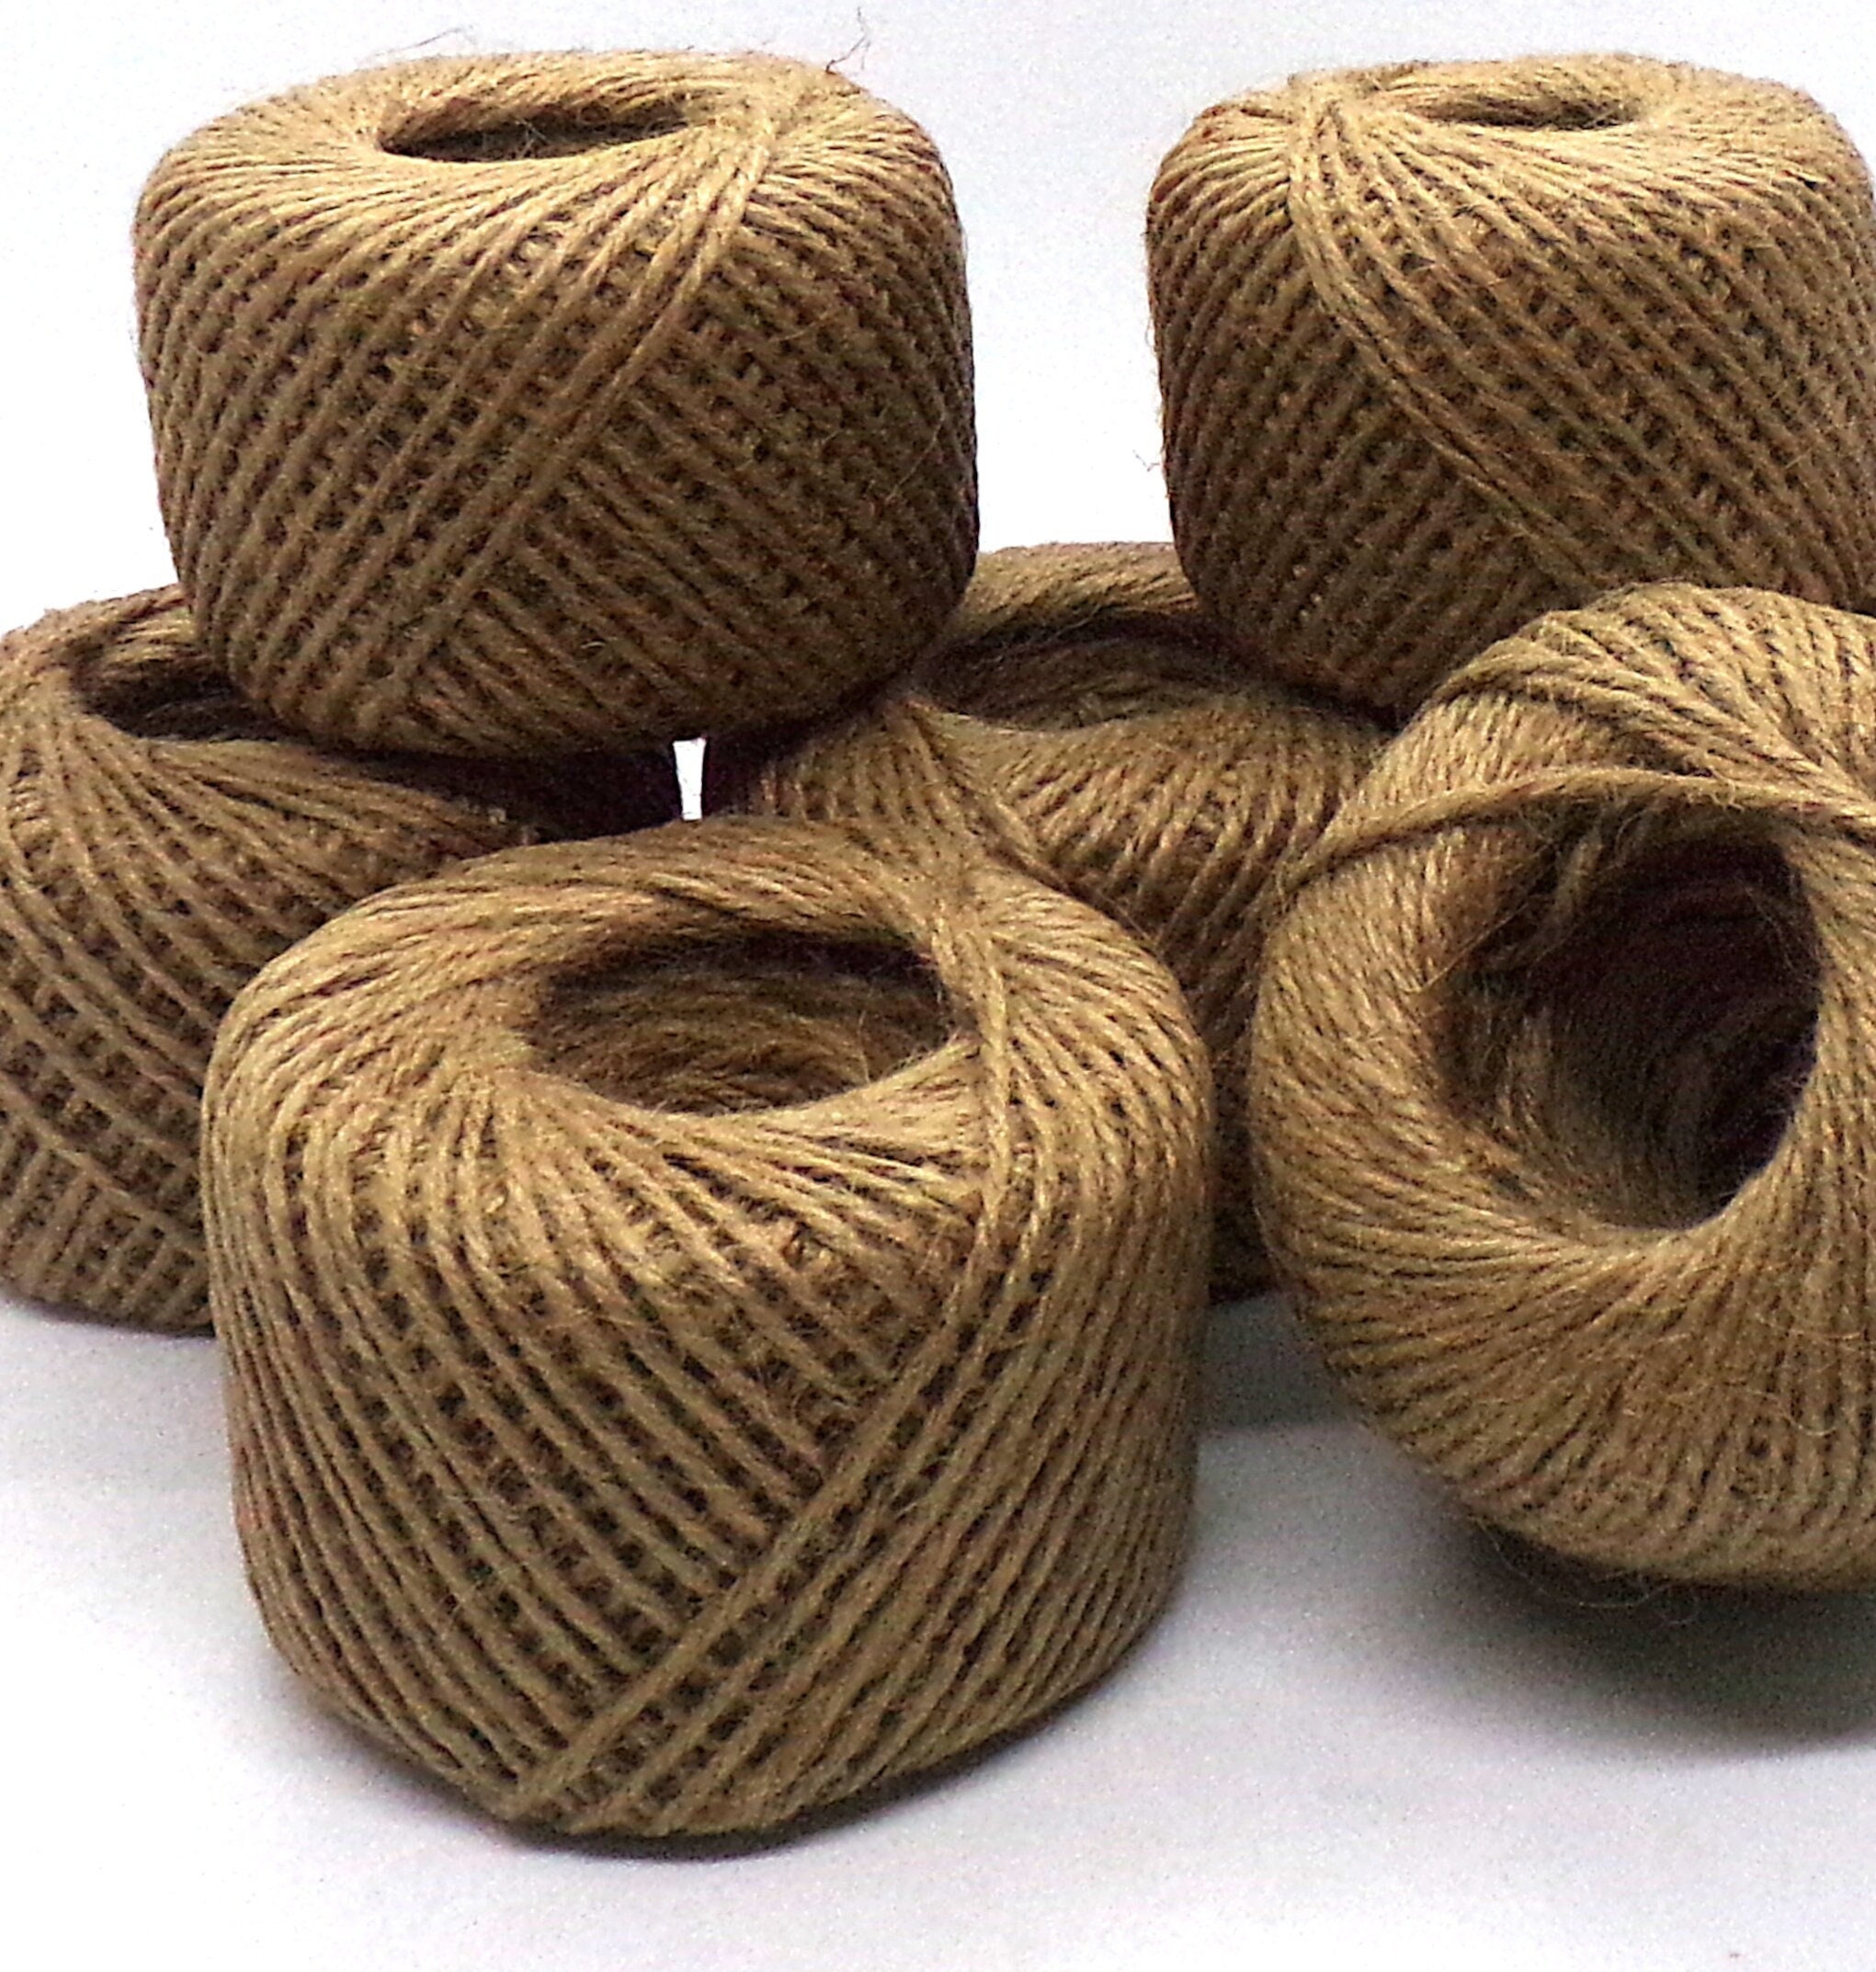 Fabric Mackur DIY hemp rope gift packaging twine yarn for day gifts wrapping wedding decoration office garden projects 2 mm x 50 m 1 roll 50M*2MM khaki 